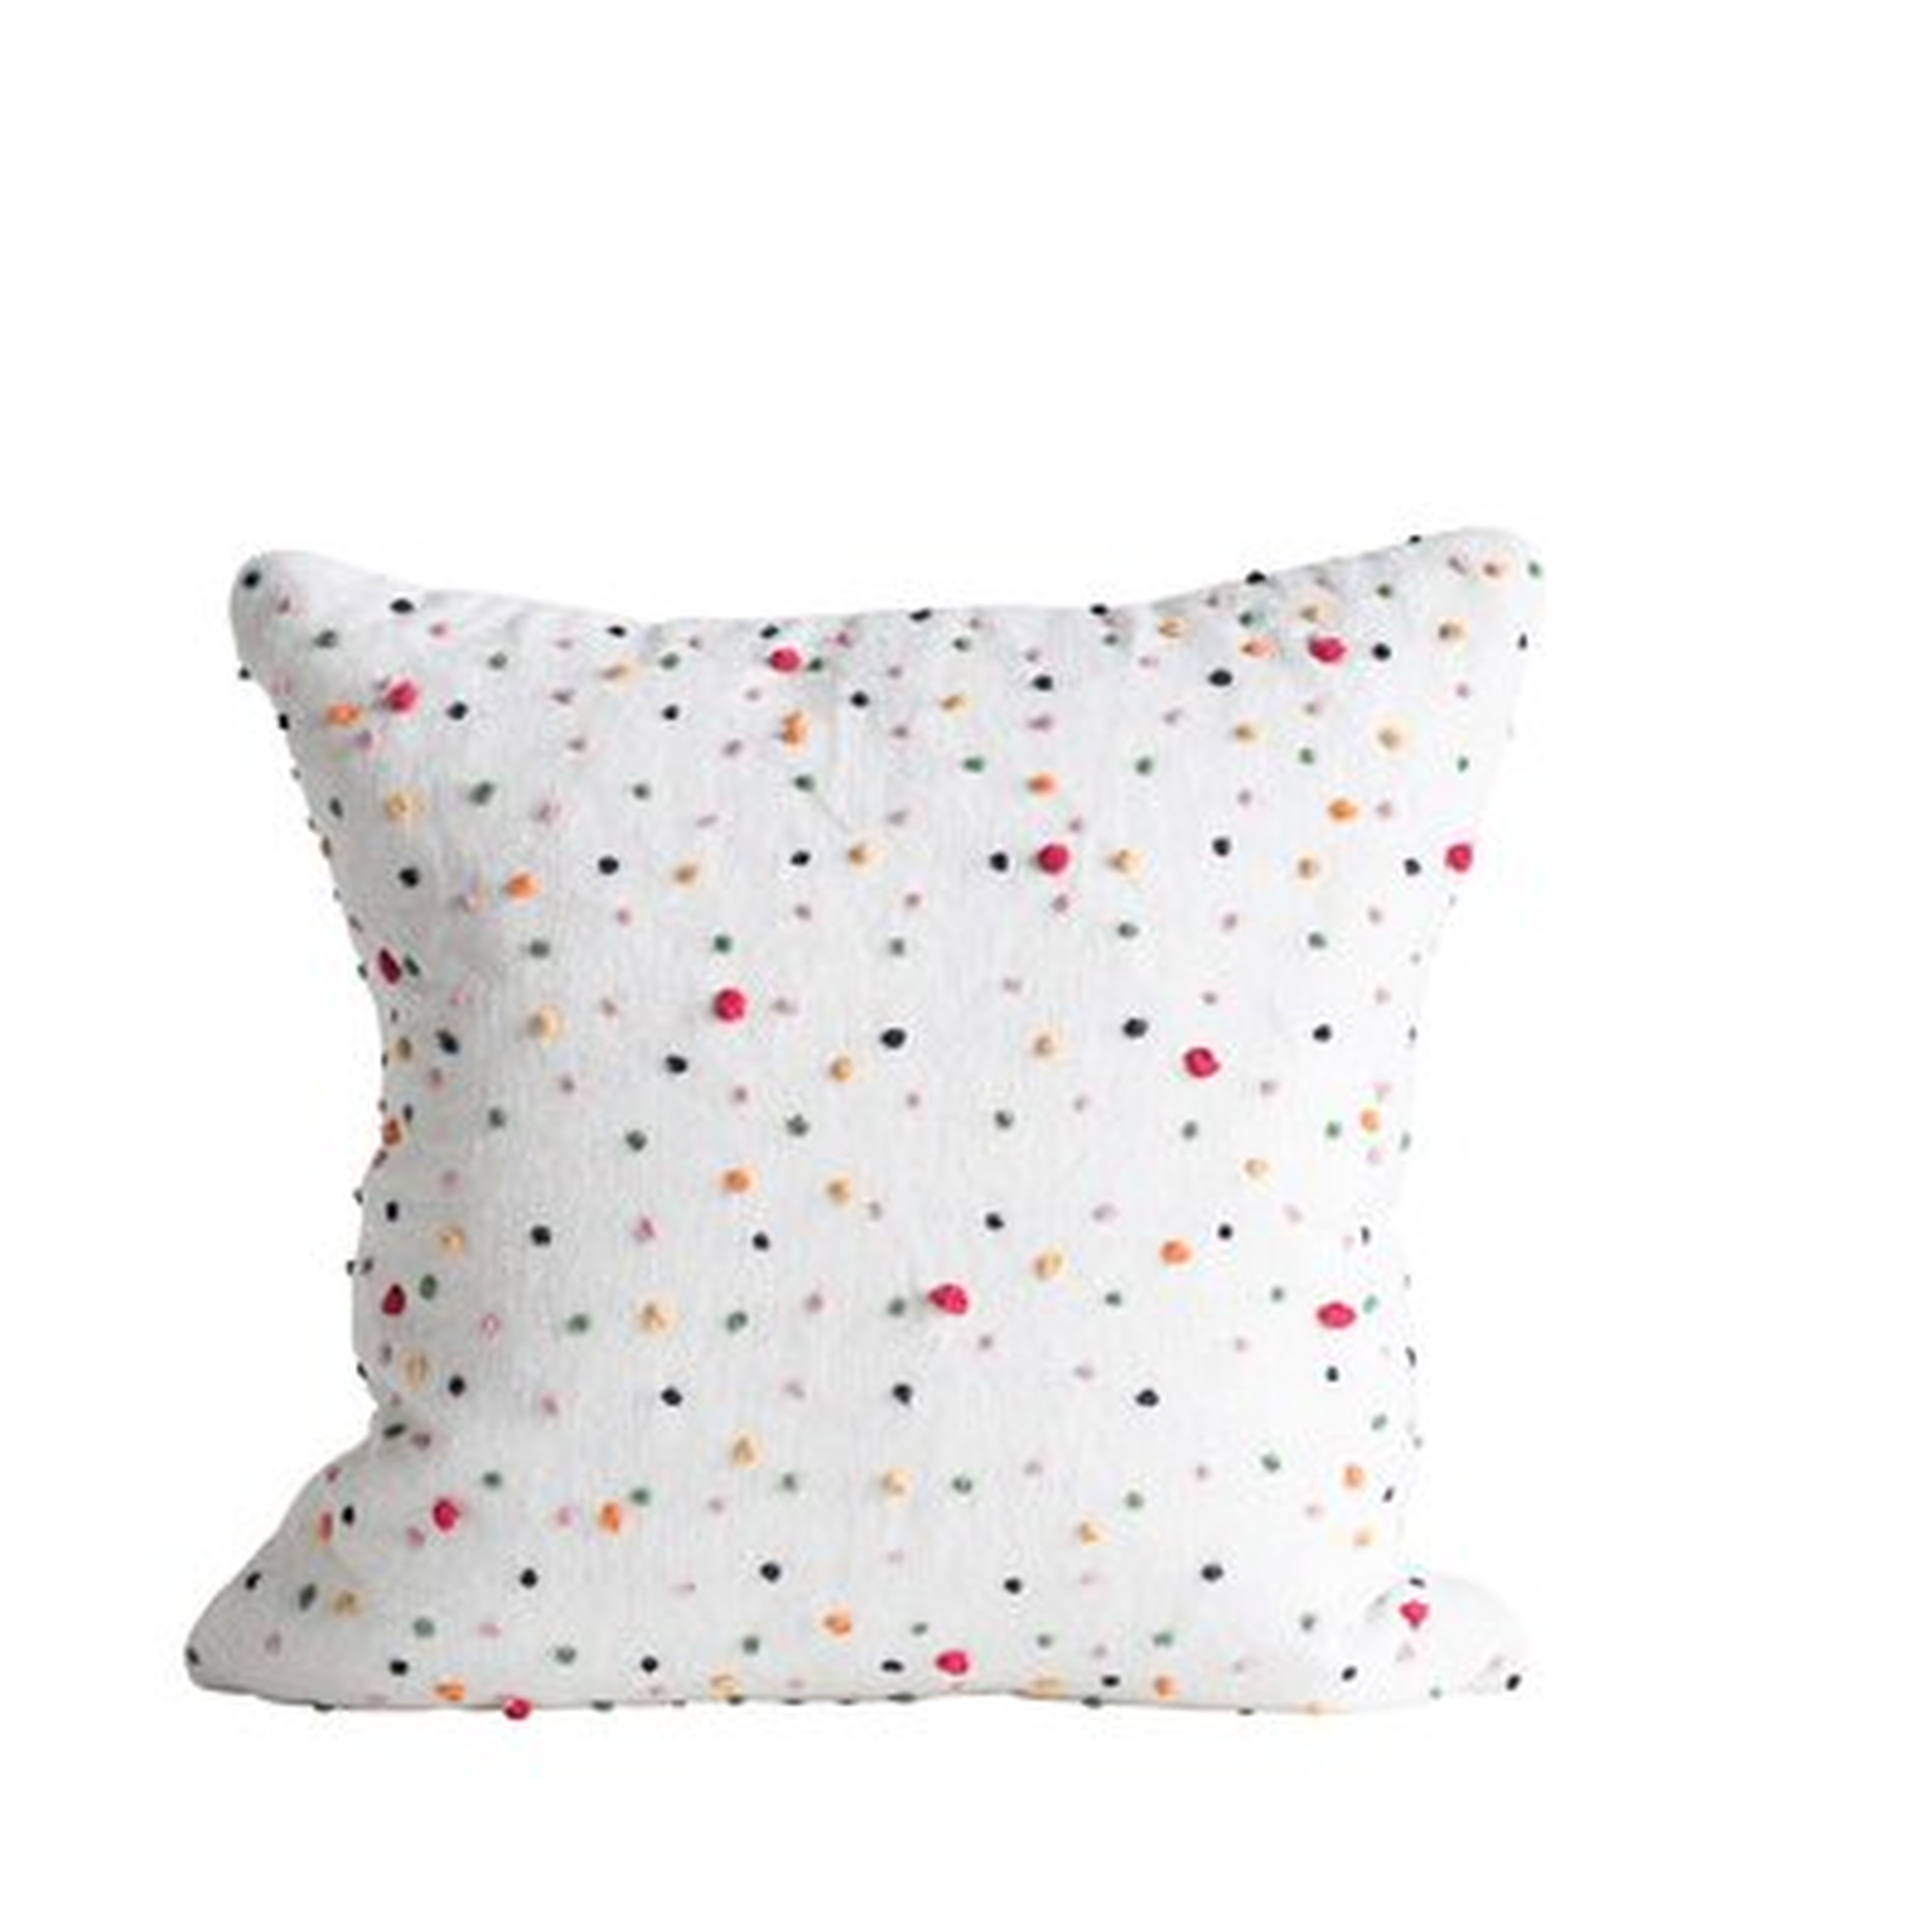 Seifert Polka Dots and French Knots Square Cotton Throw Pillow - Wayfair